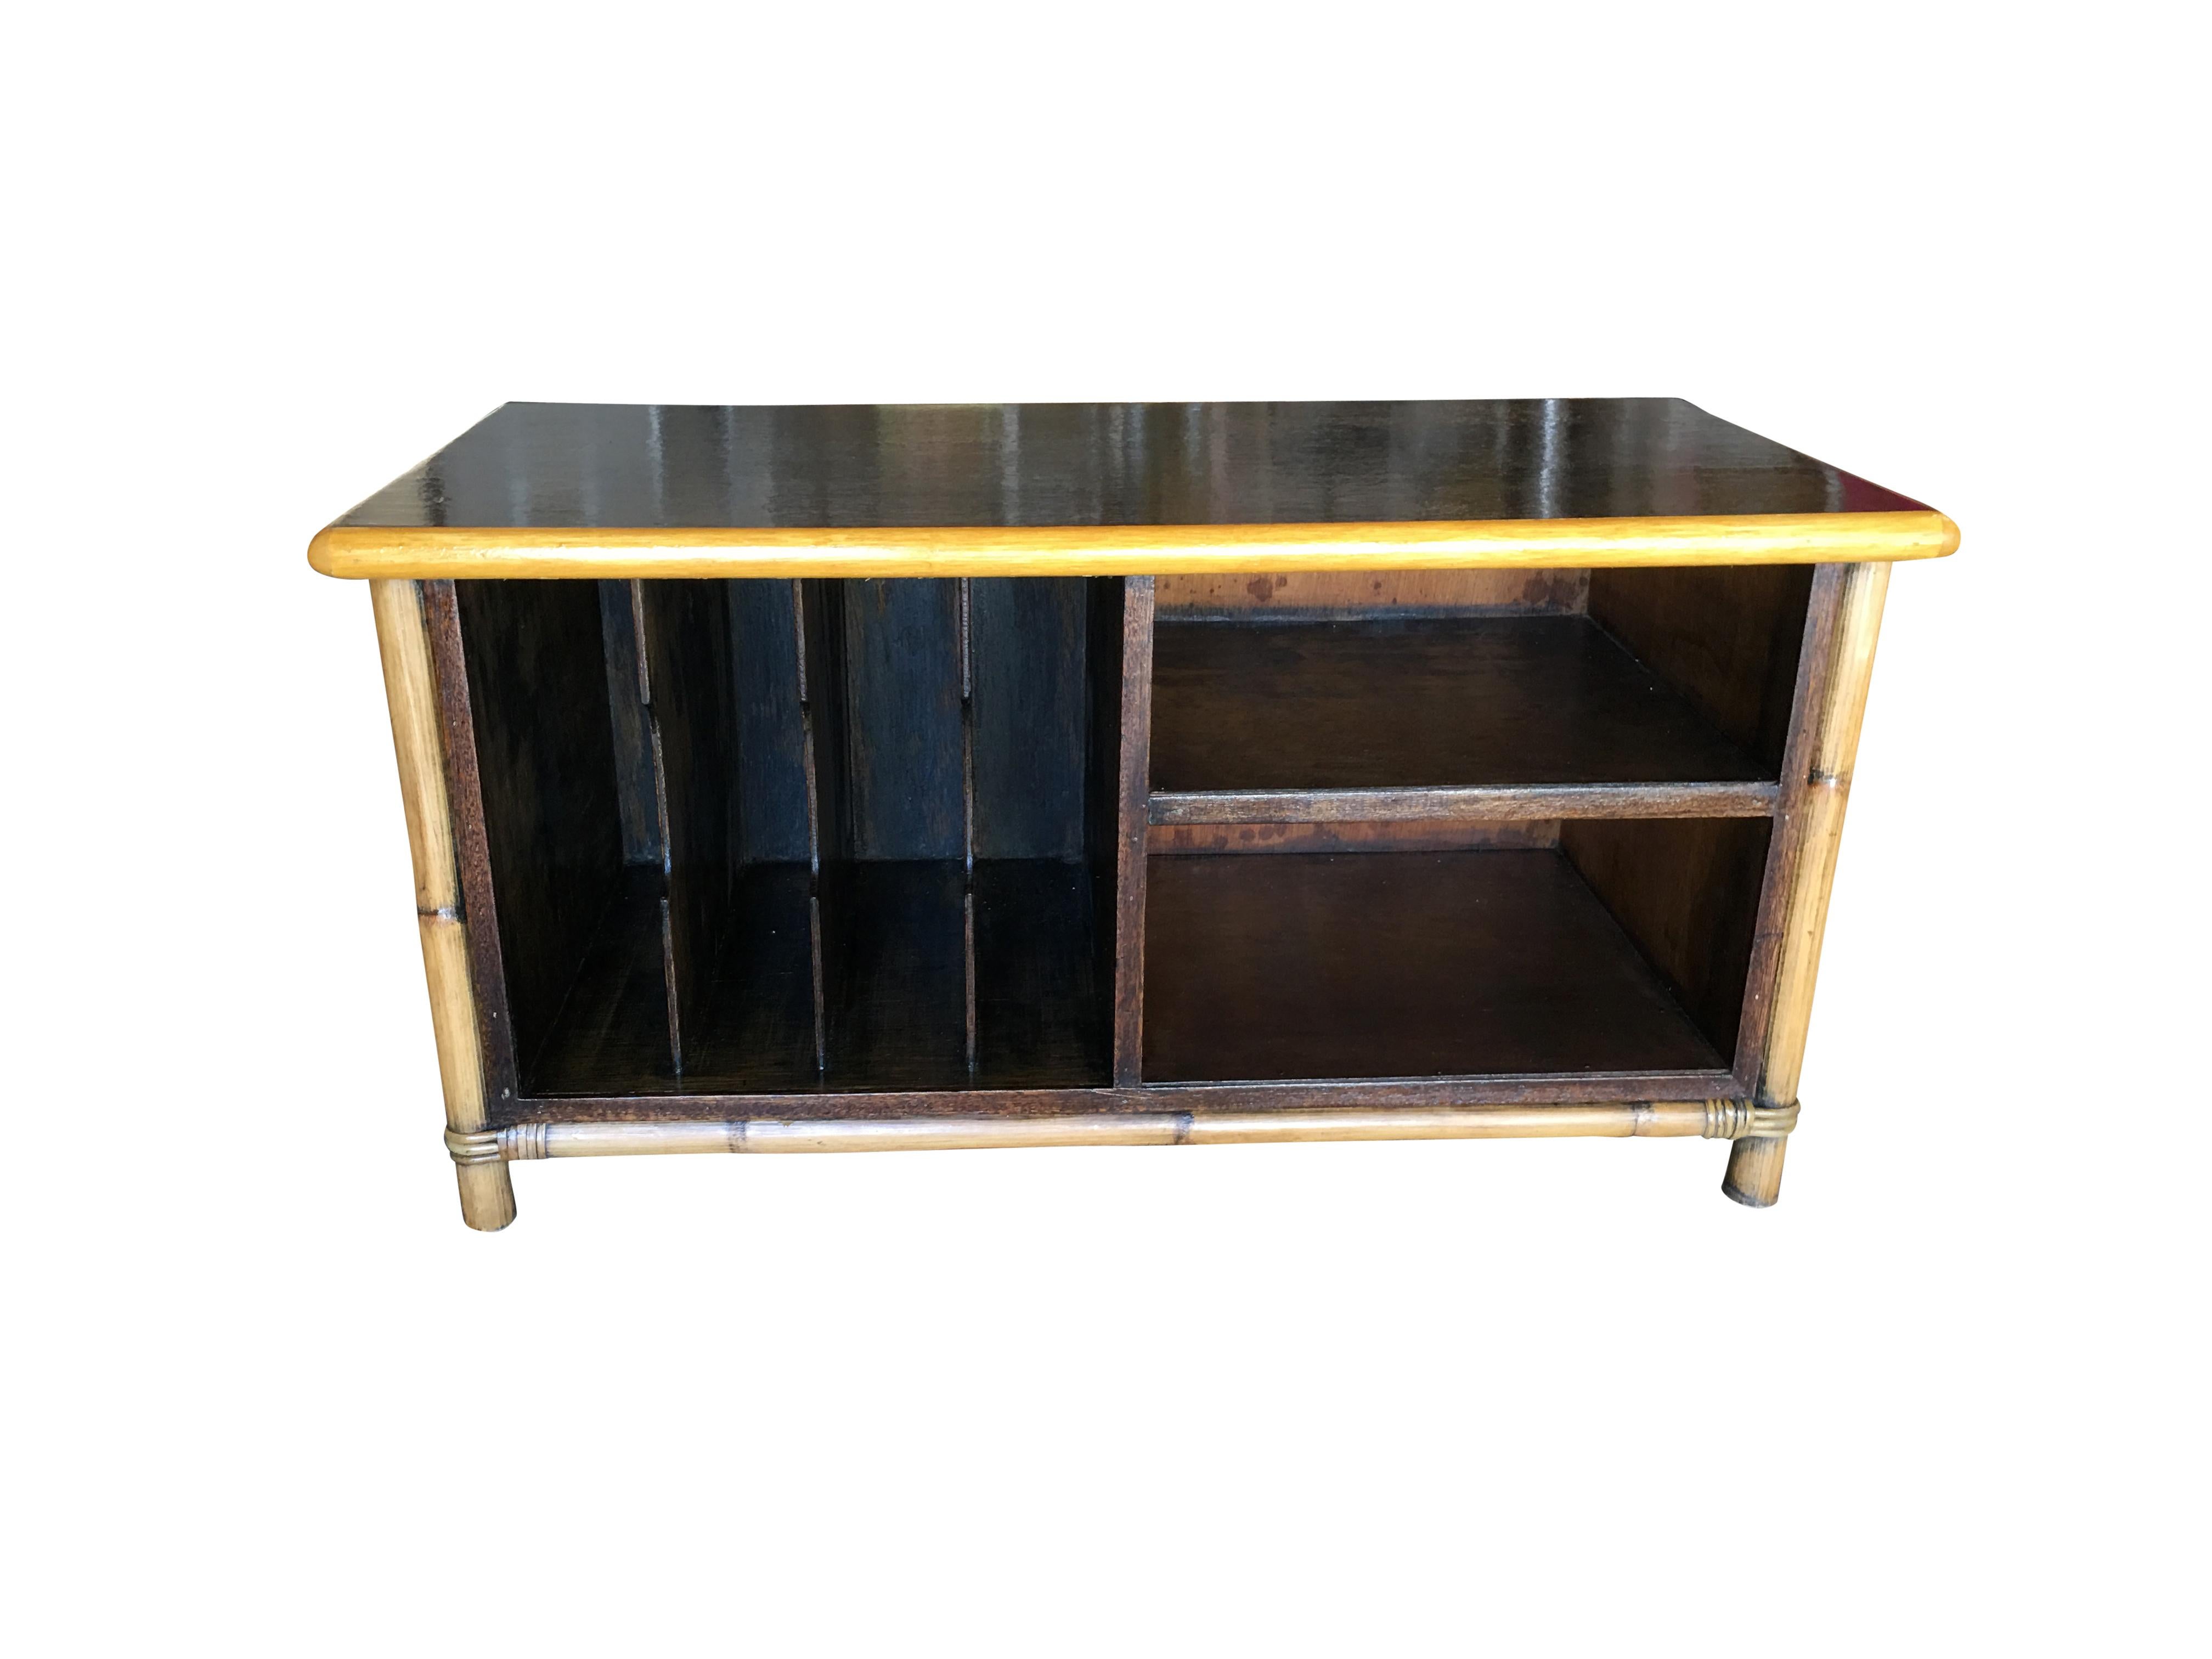 Rattan and mahogany TV stand made with adjustable shelf for holding two TV components and featuring four slots for holding vinyl records.

Great for holding modern 70